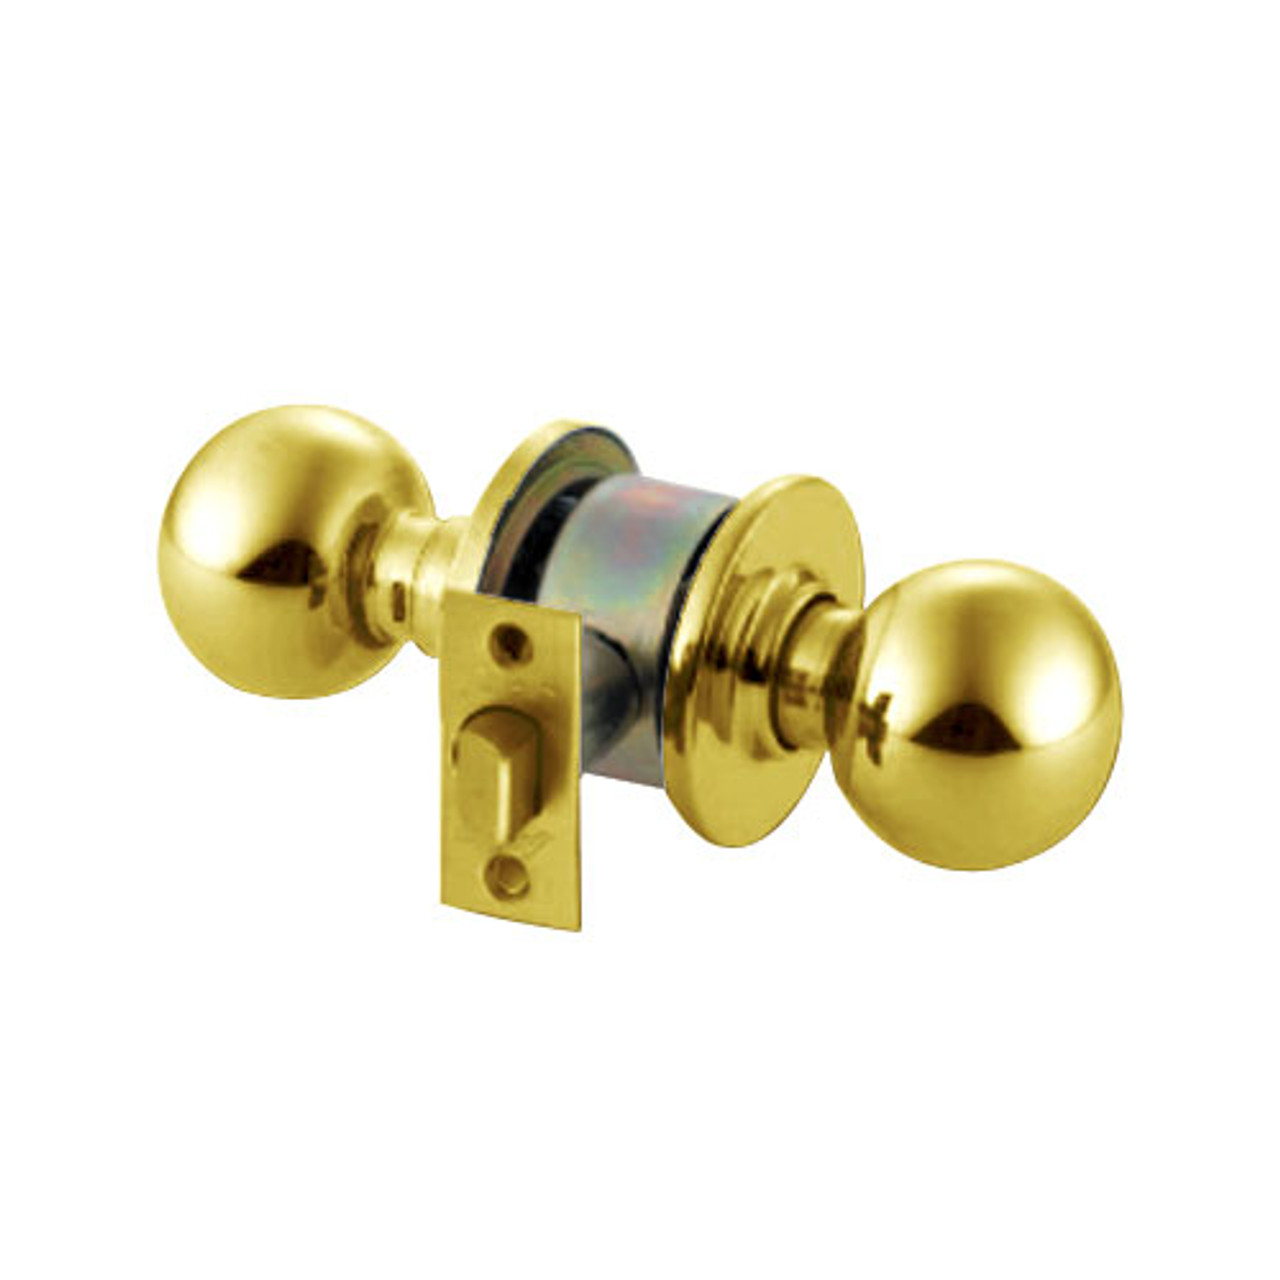 MK01-BD-05A Arrow Lock MK Series Non Keyed Cylindrical Locksets for Passage with BD Knob in Antique Brass Finish